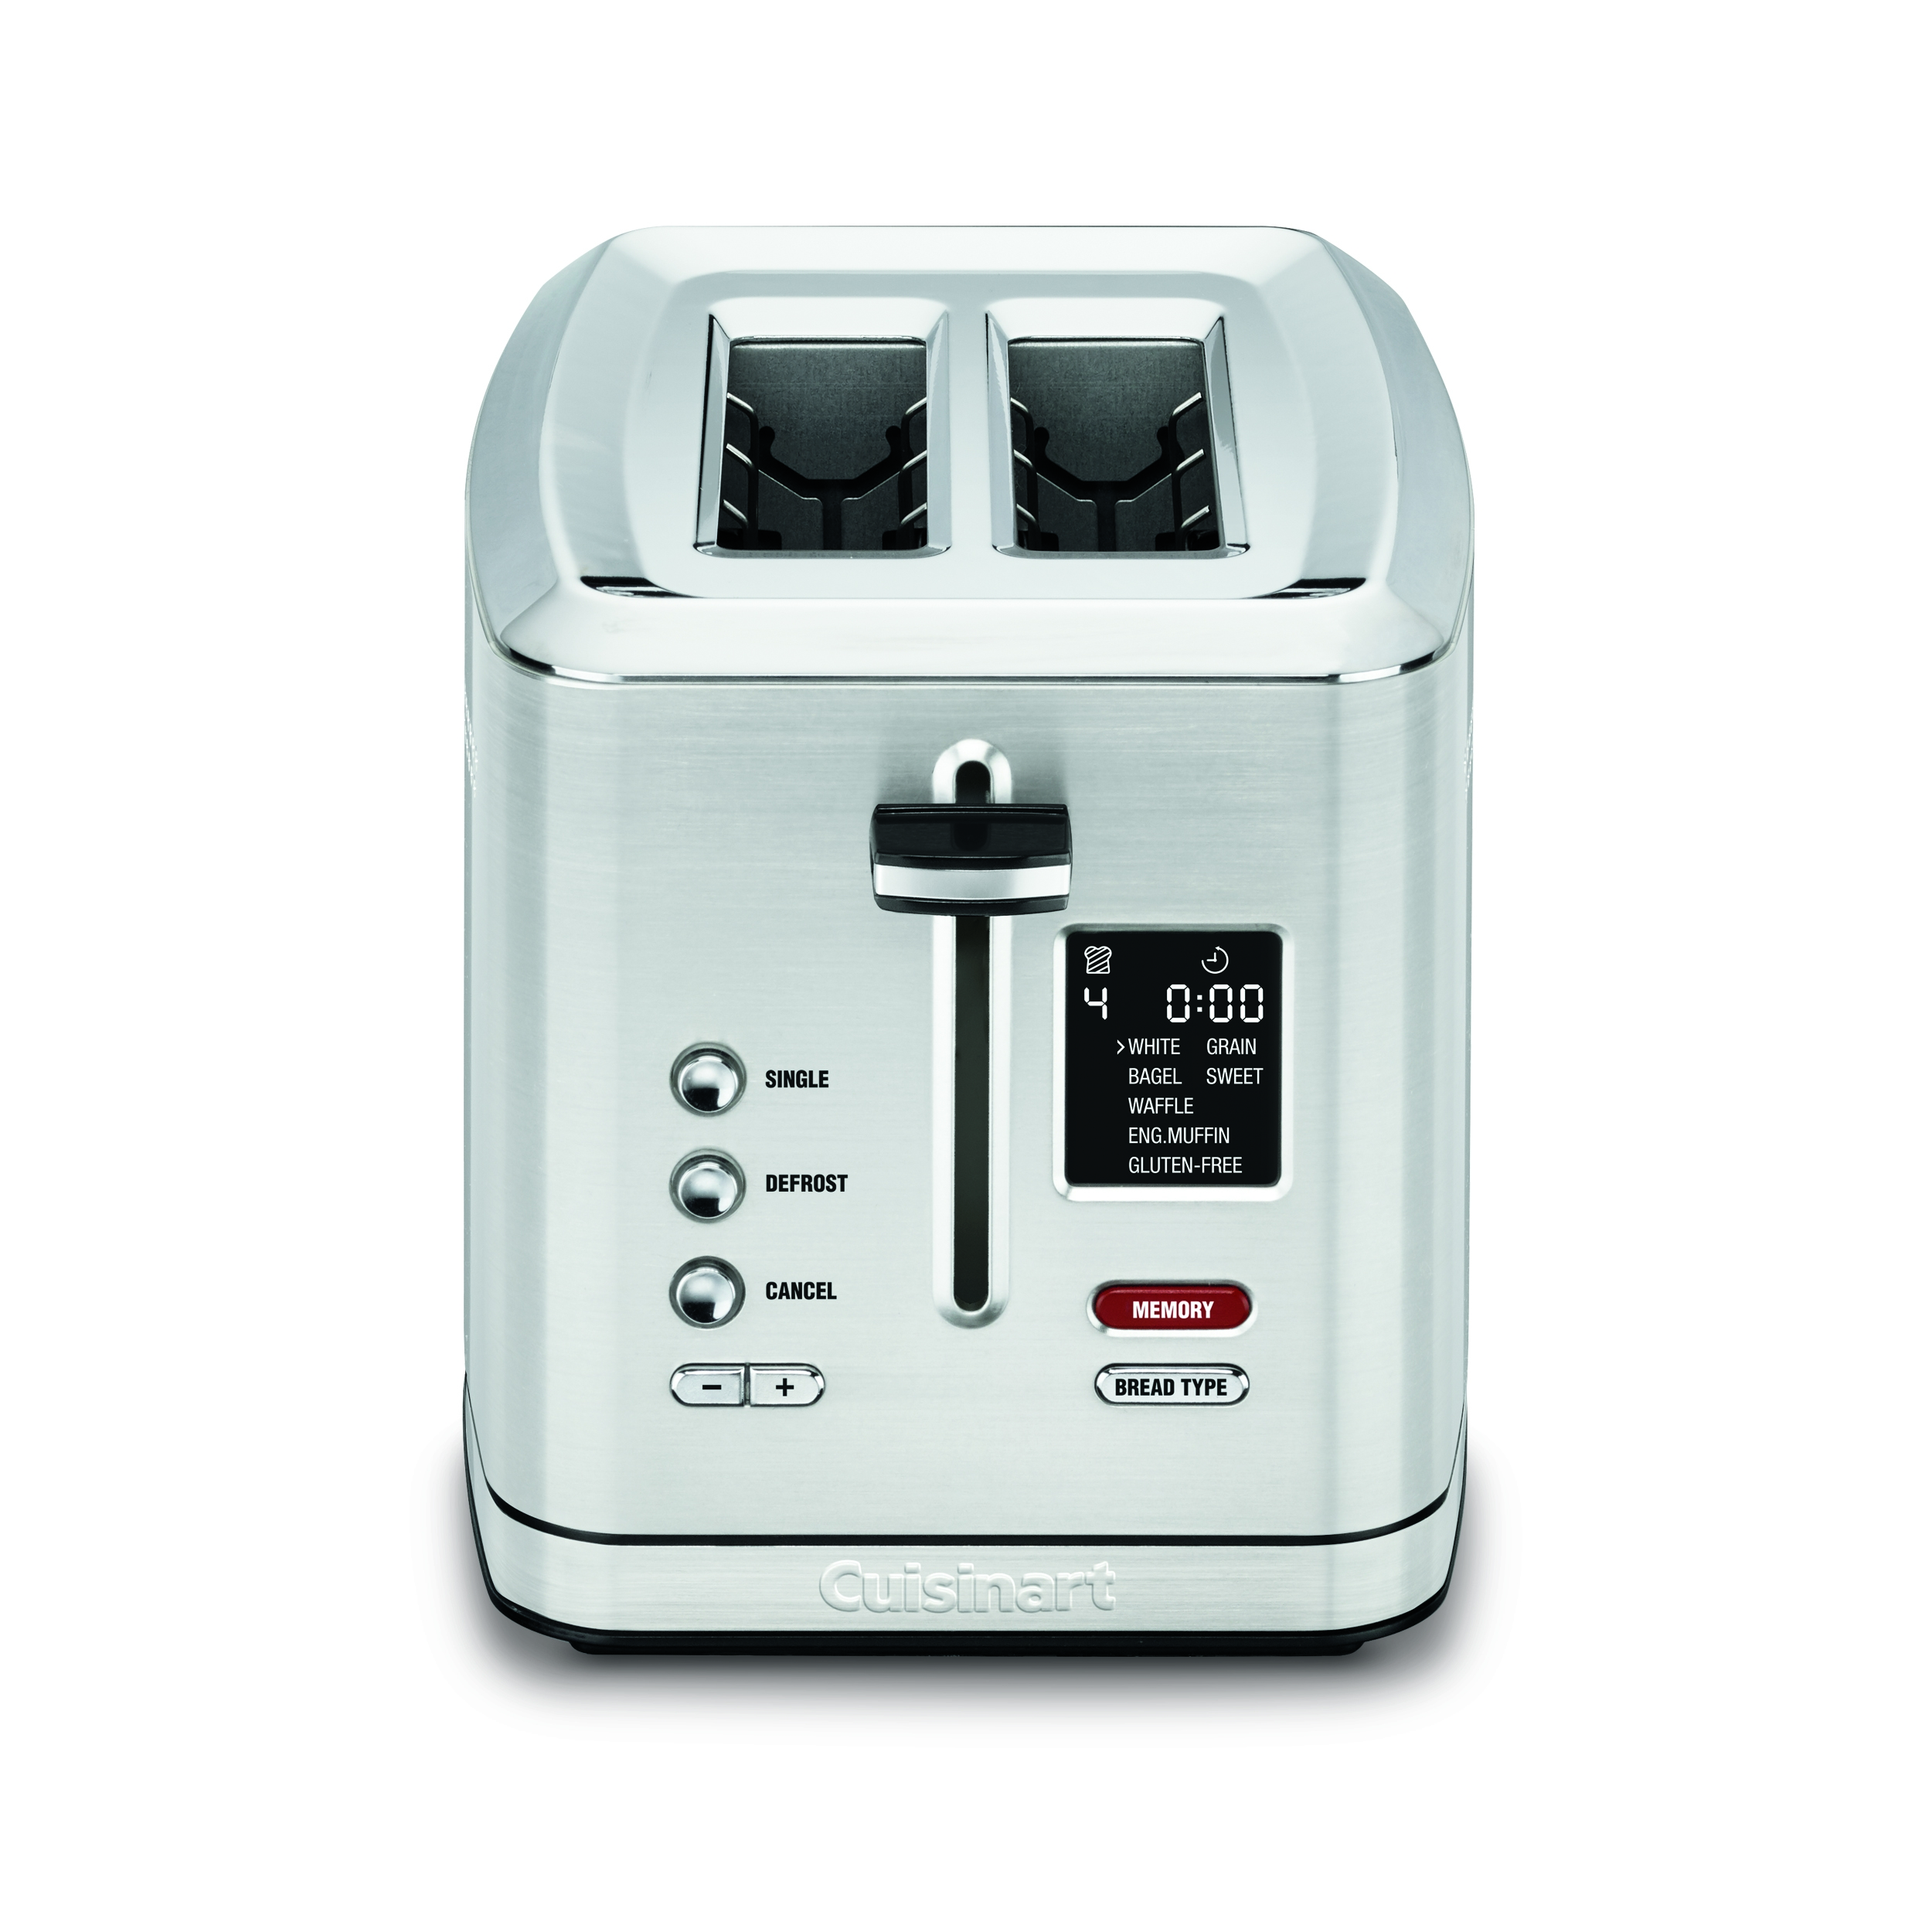 Cuisinart 2-Slice Digital Toaster with MemorySet Feature